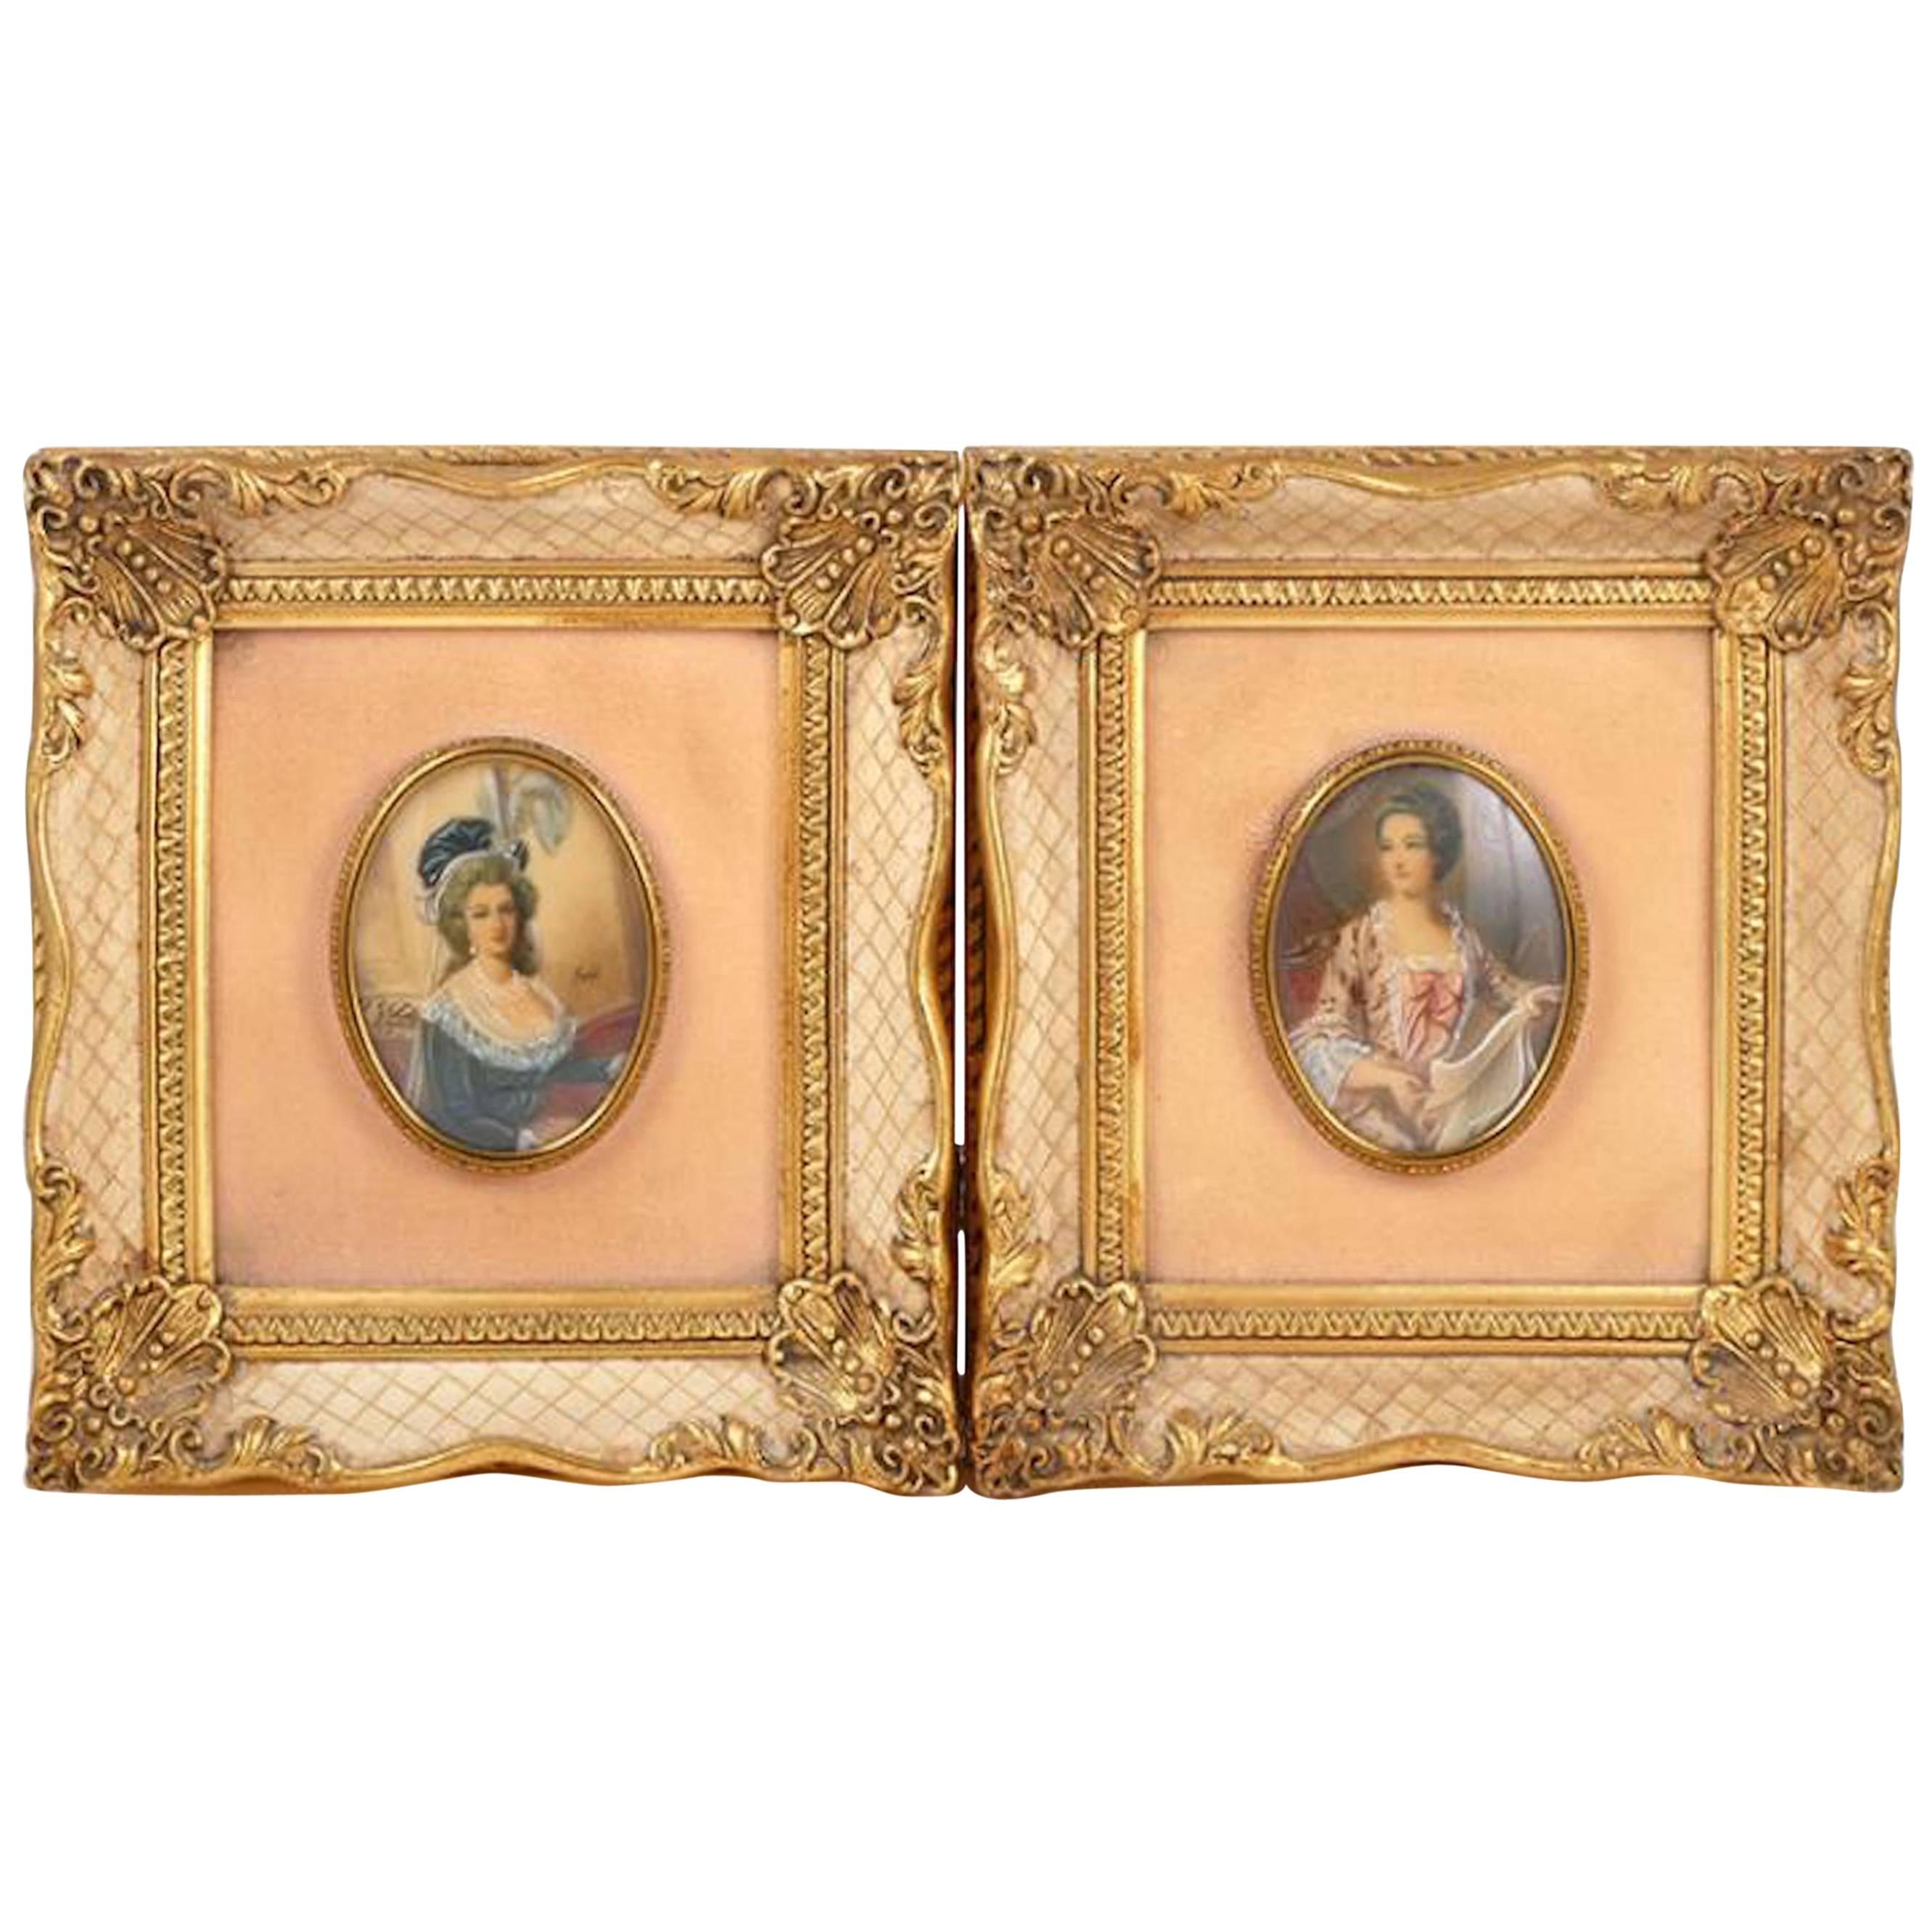 Two 19th Century Miniature Signed Hand-Painted Portraits